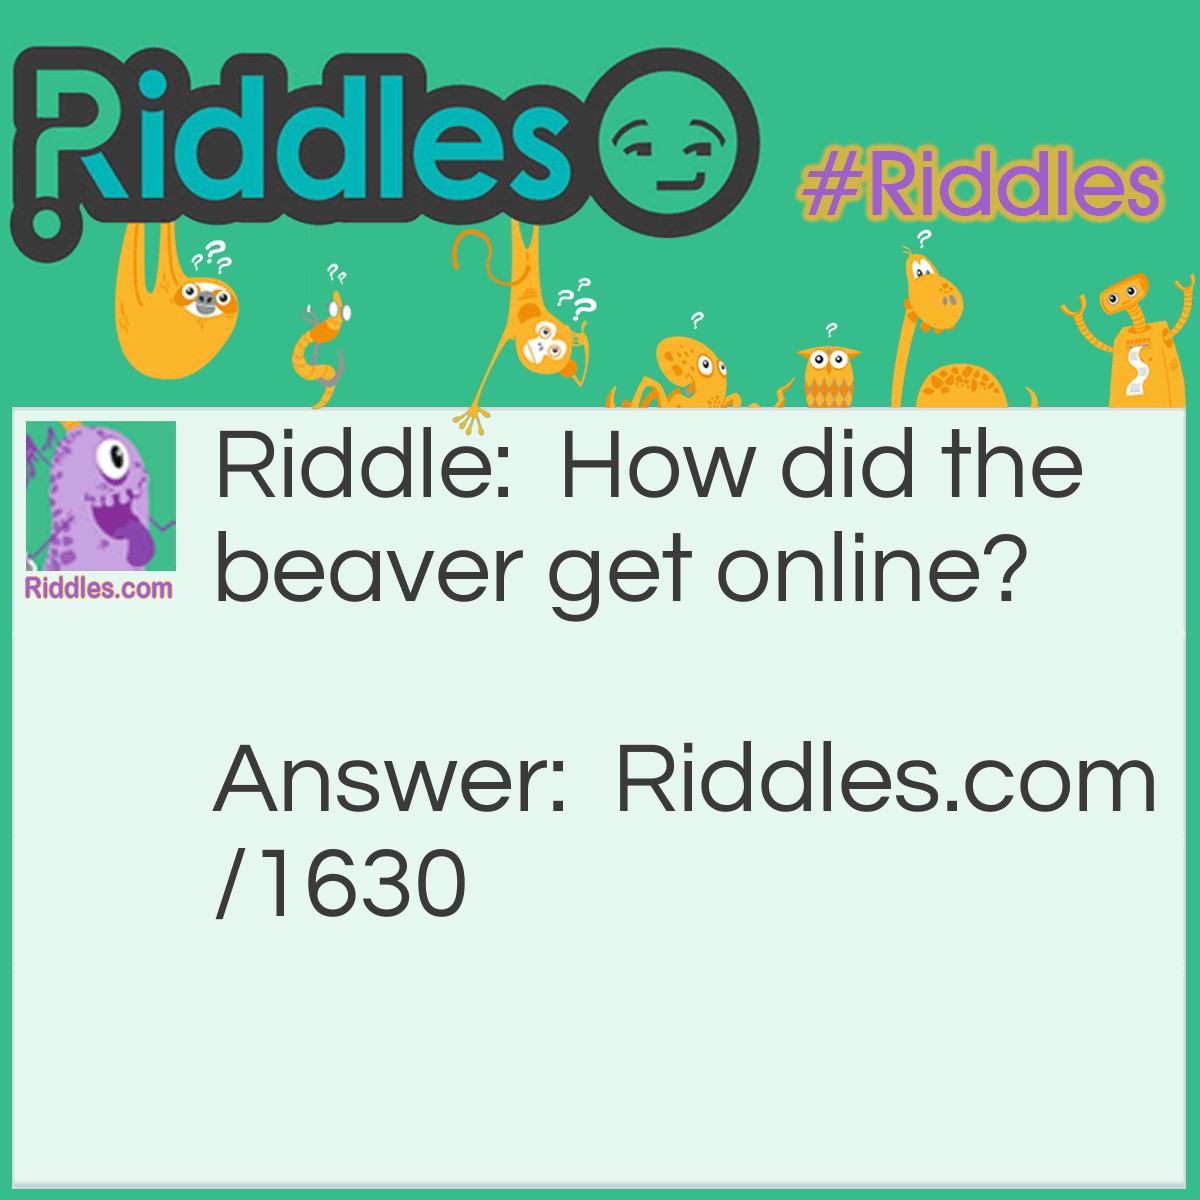 Riddle: How did the beaver get online? Answer: He logged on.